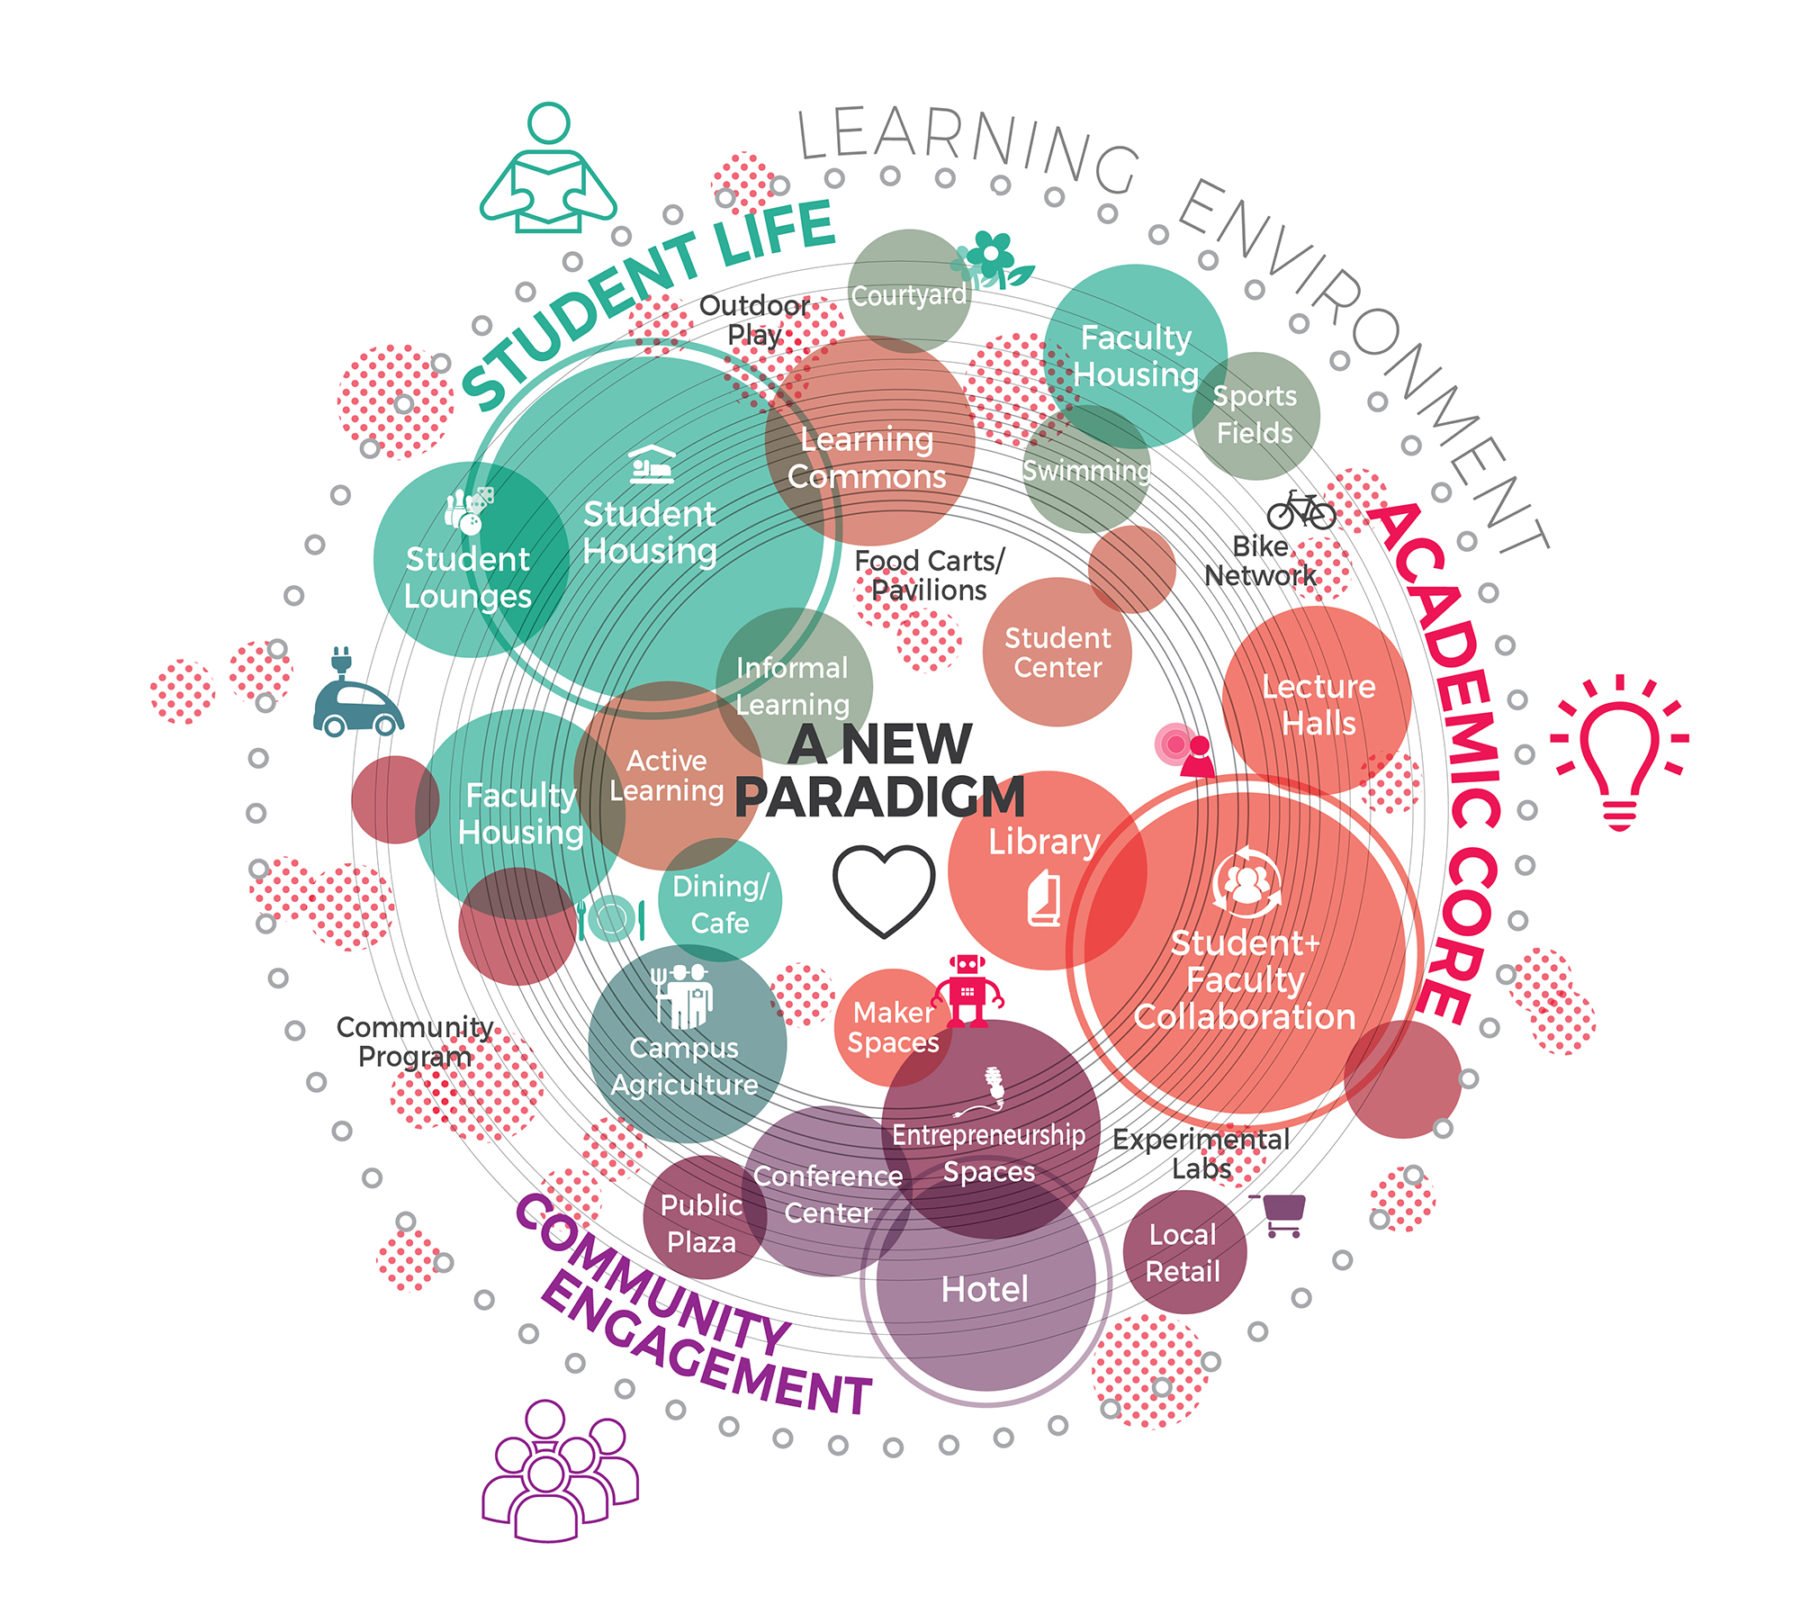 A bubble diagram showing the conceptual ideas and spaces based on academic core, community engagement and student life